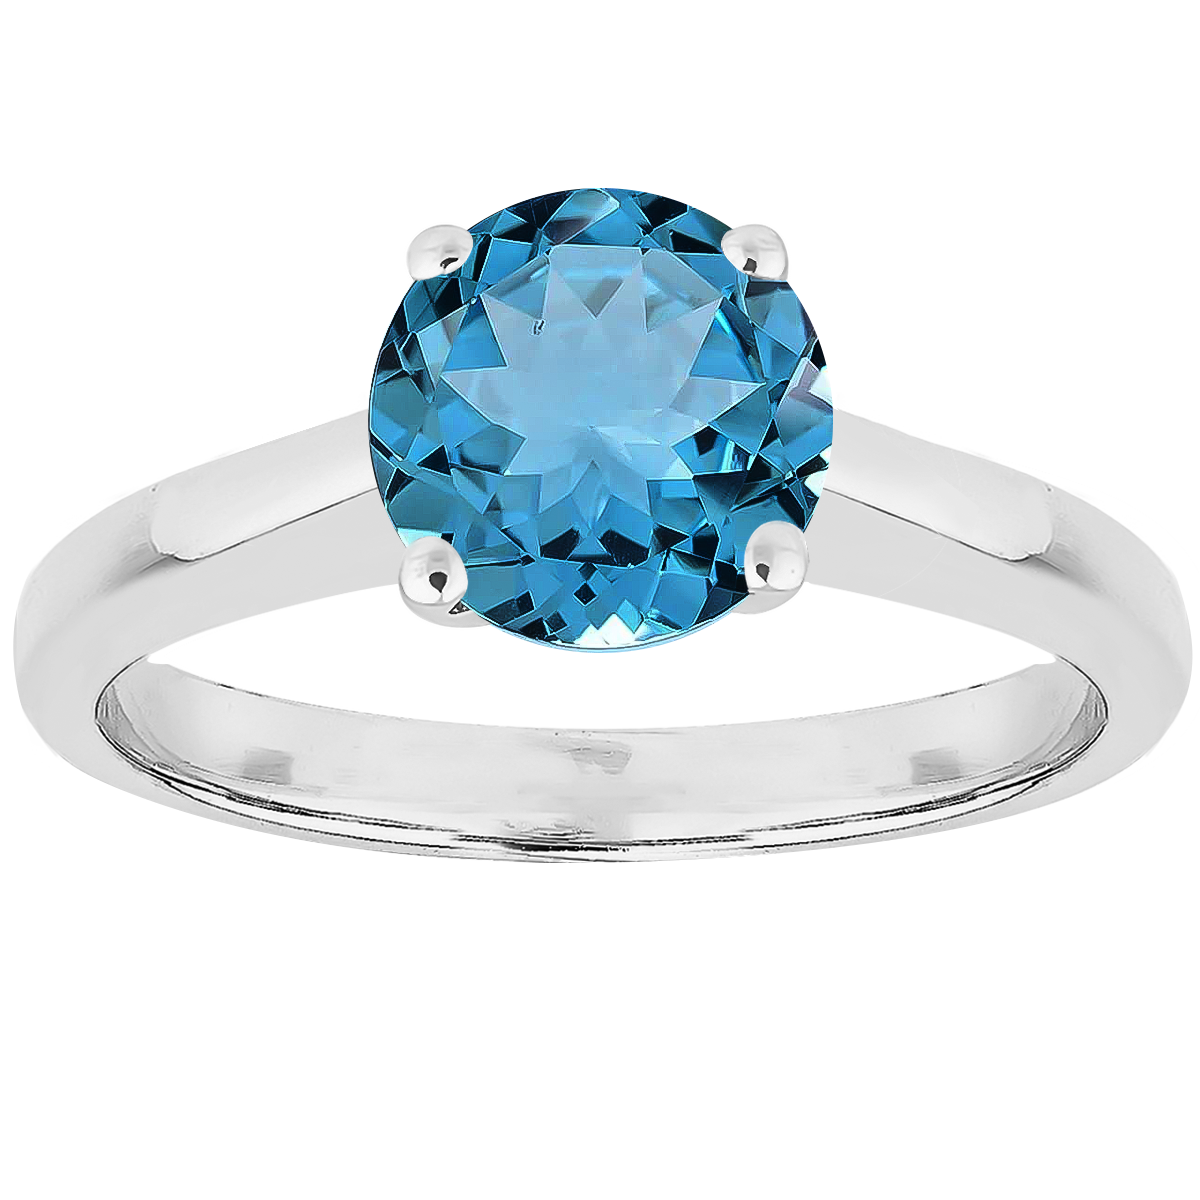 0.50ct Swiss Topaz Solitaire Engagement Ring in 9ct White Gold.